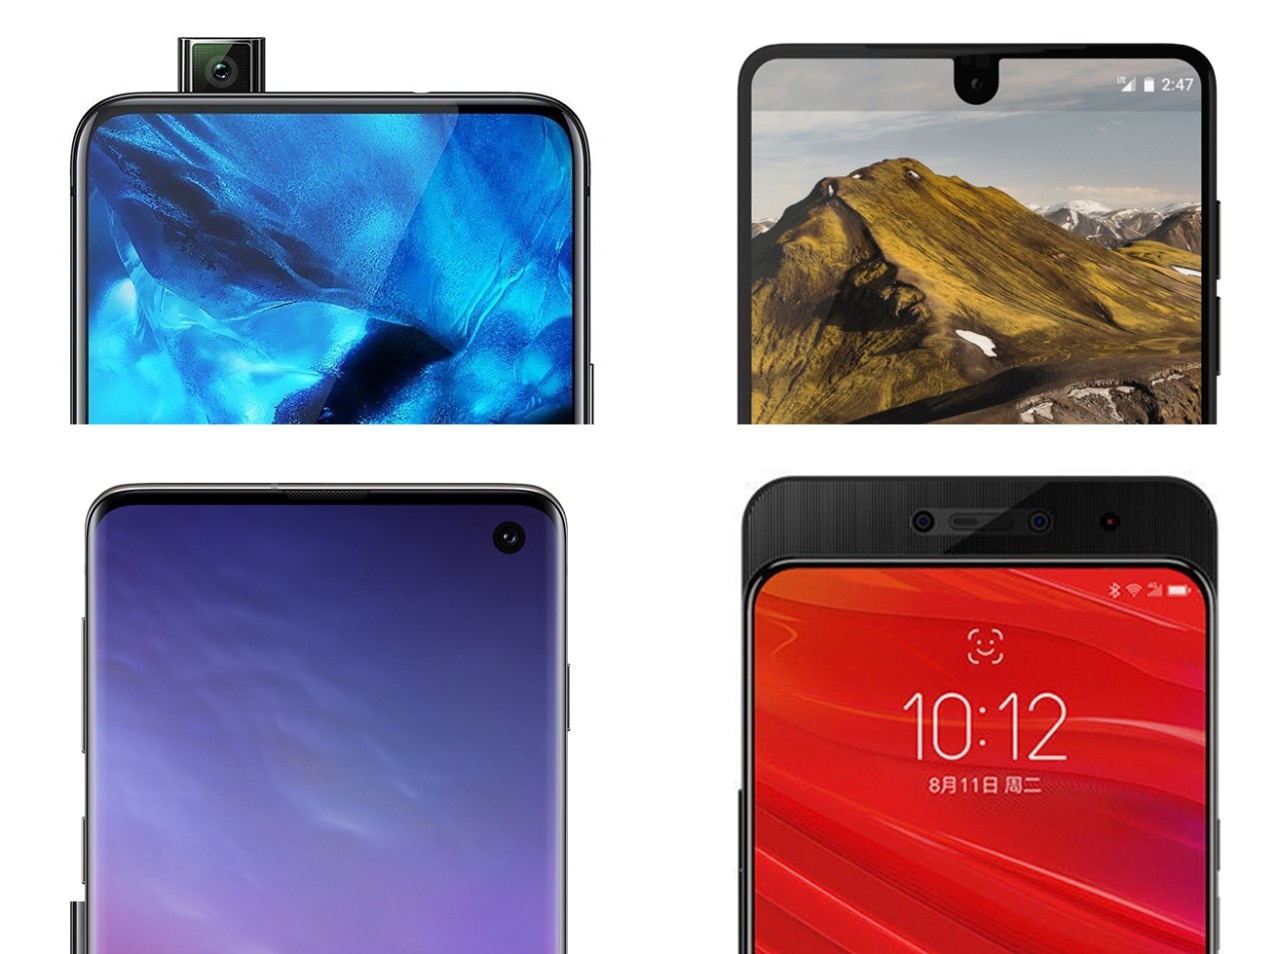  Four smartphones with a notch display and advanced camera features.